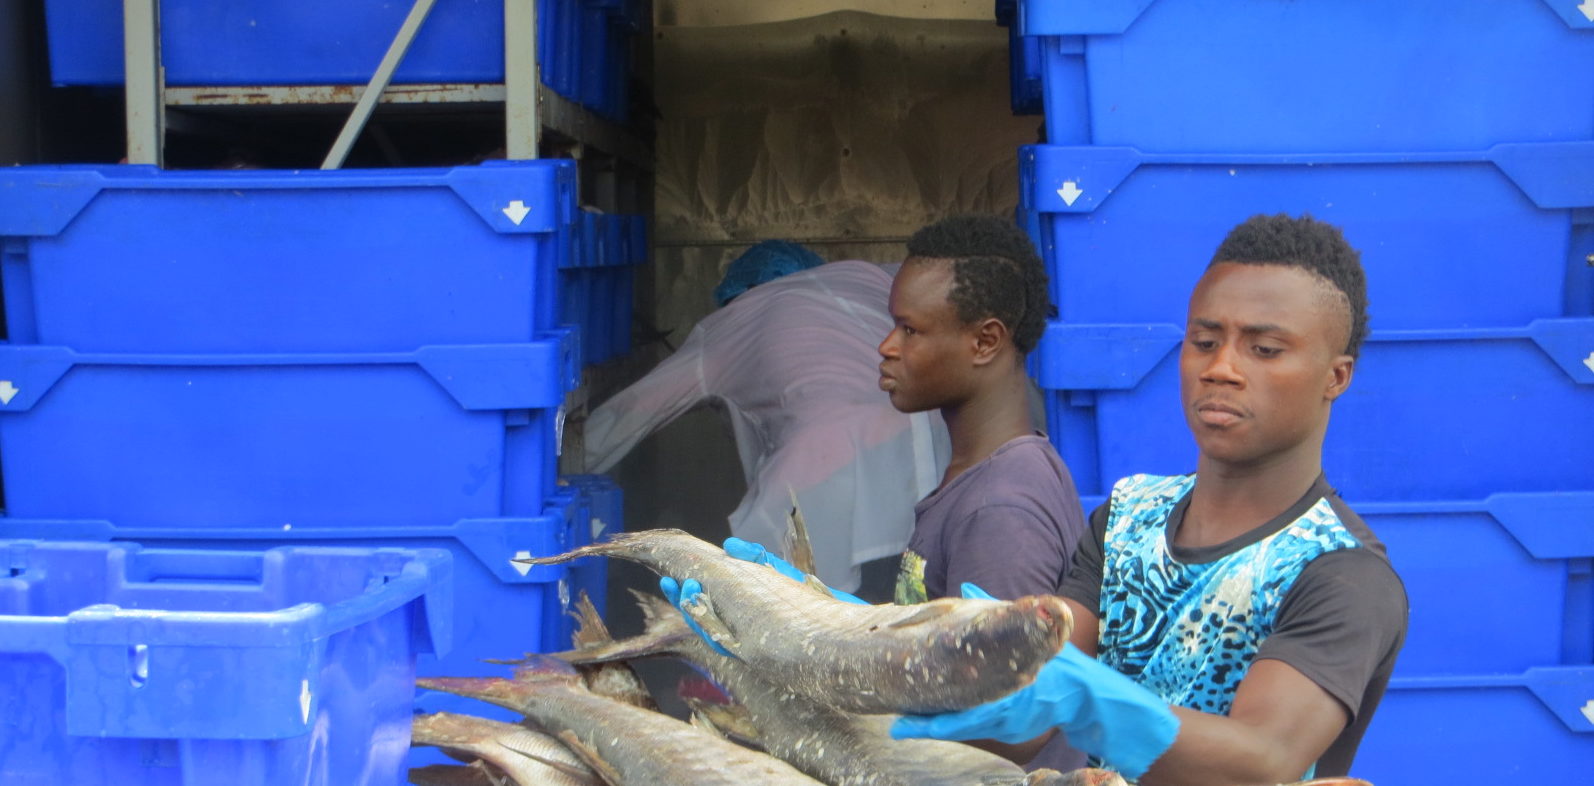 Sad news from West-African fishing territories